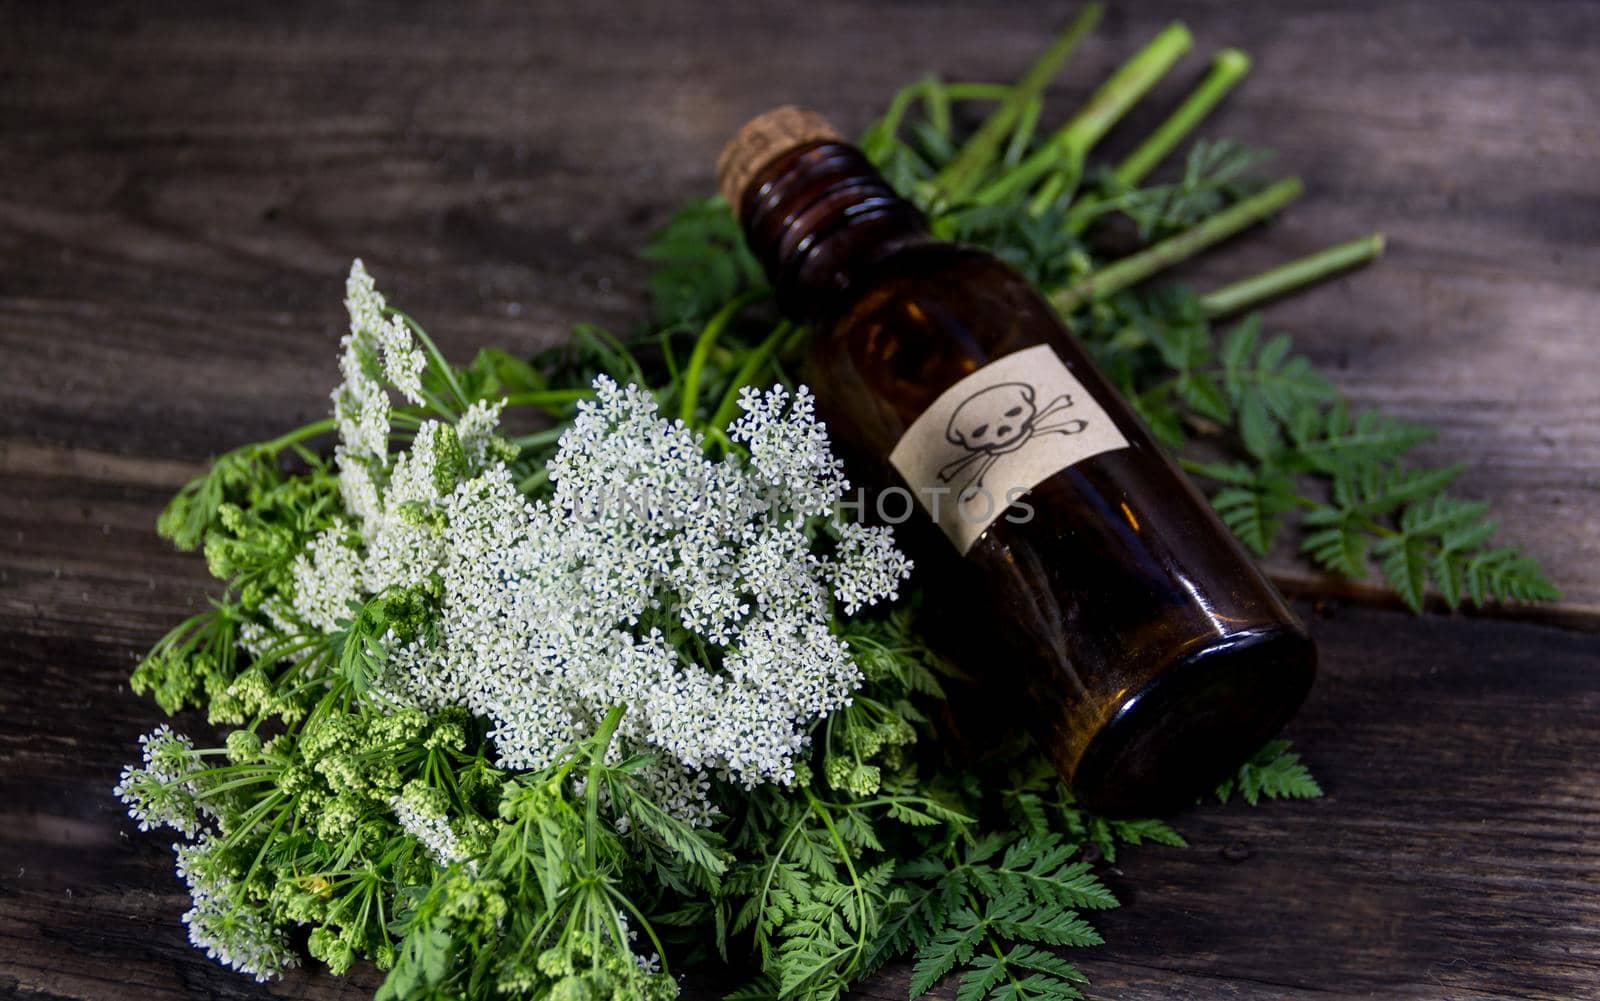 hemlock flower bouquet with a vial of poison by GabrielaBertolini